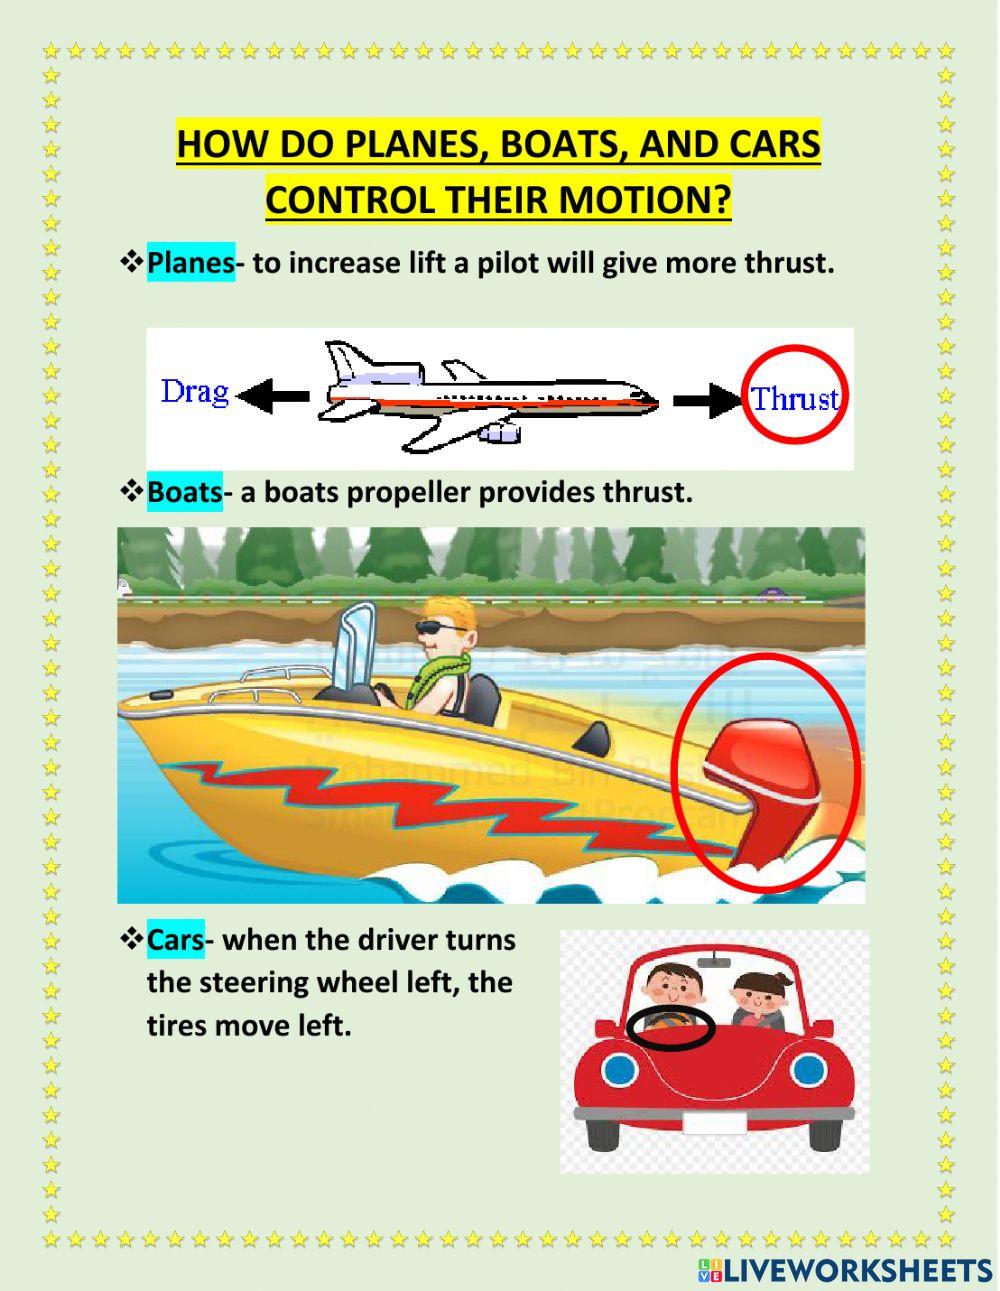 Chapter 8 lesson 2 FORCES AND TRANSPORTATION PART 2